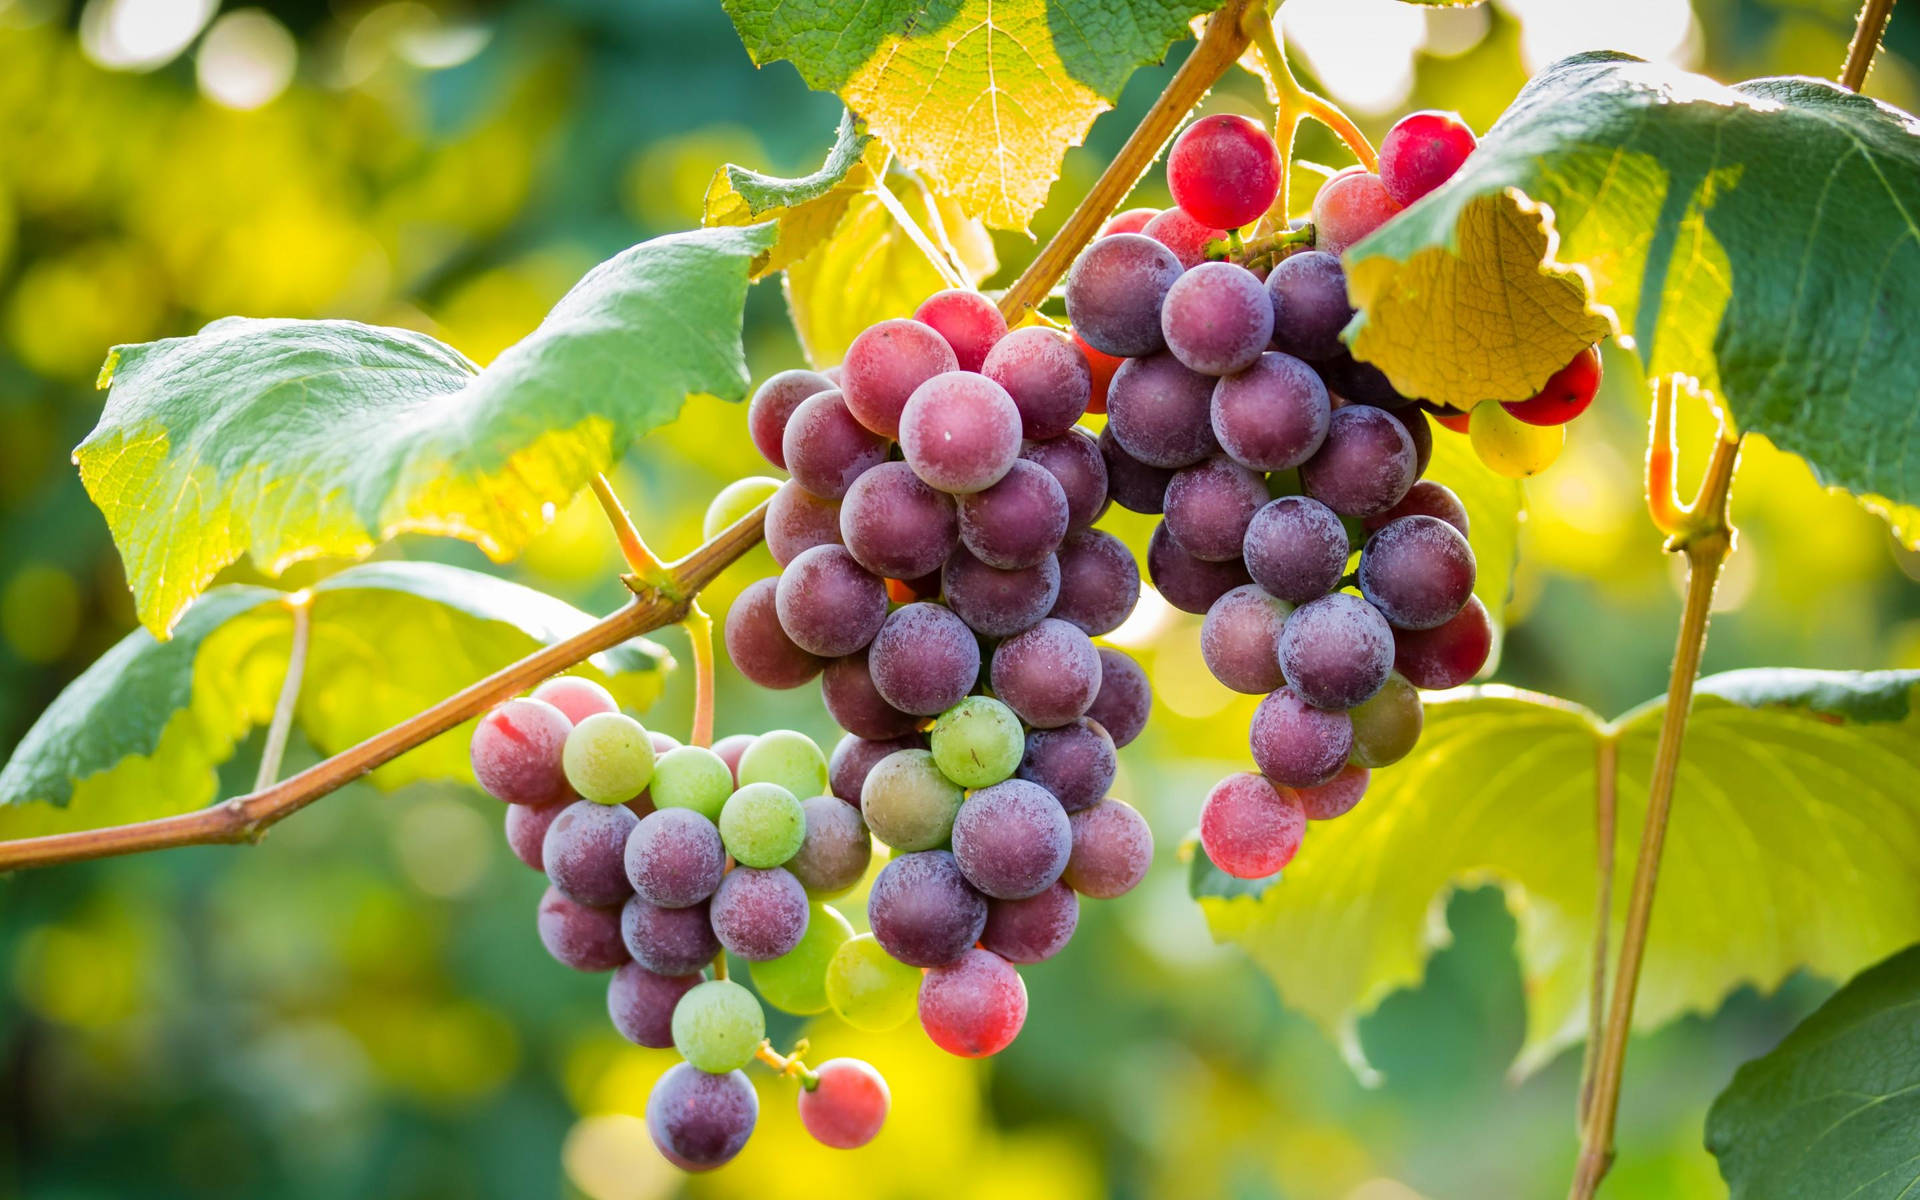 Free Grapes Wallpaper Downloads, [100+] Grapes Wallpapers for FREE |  